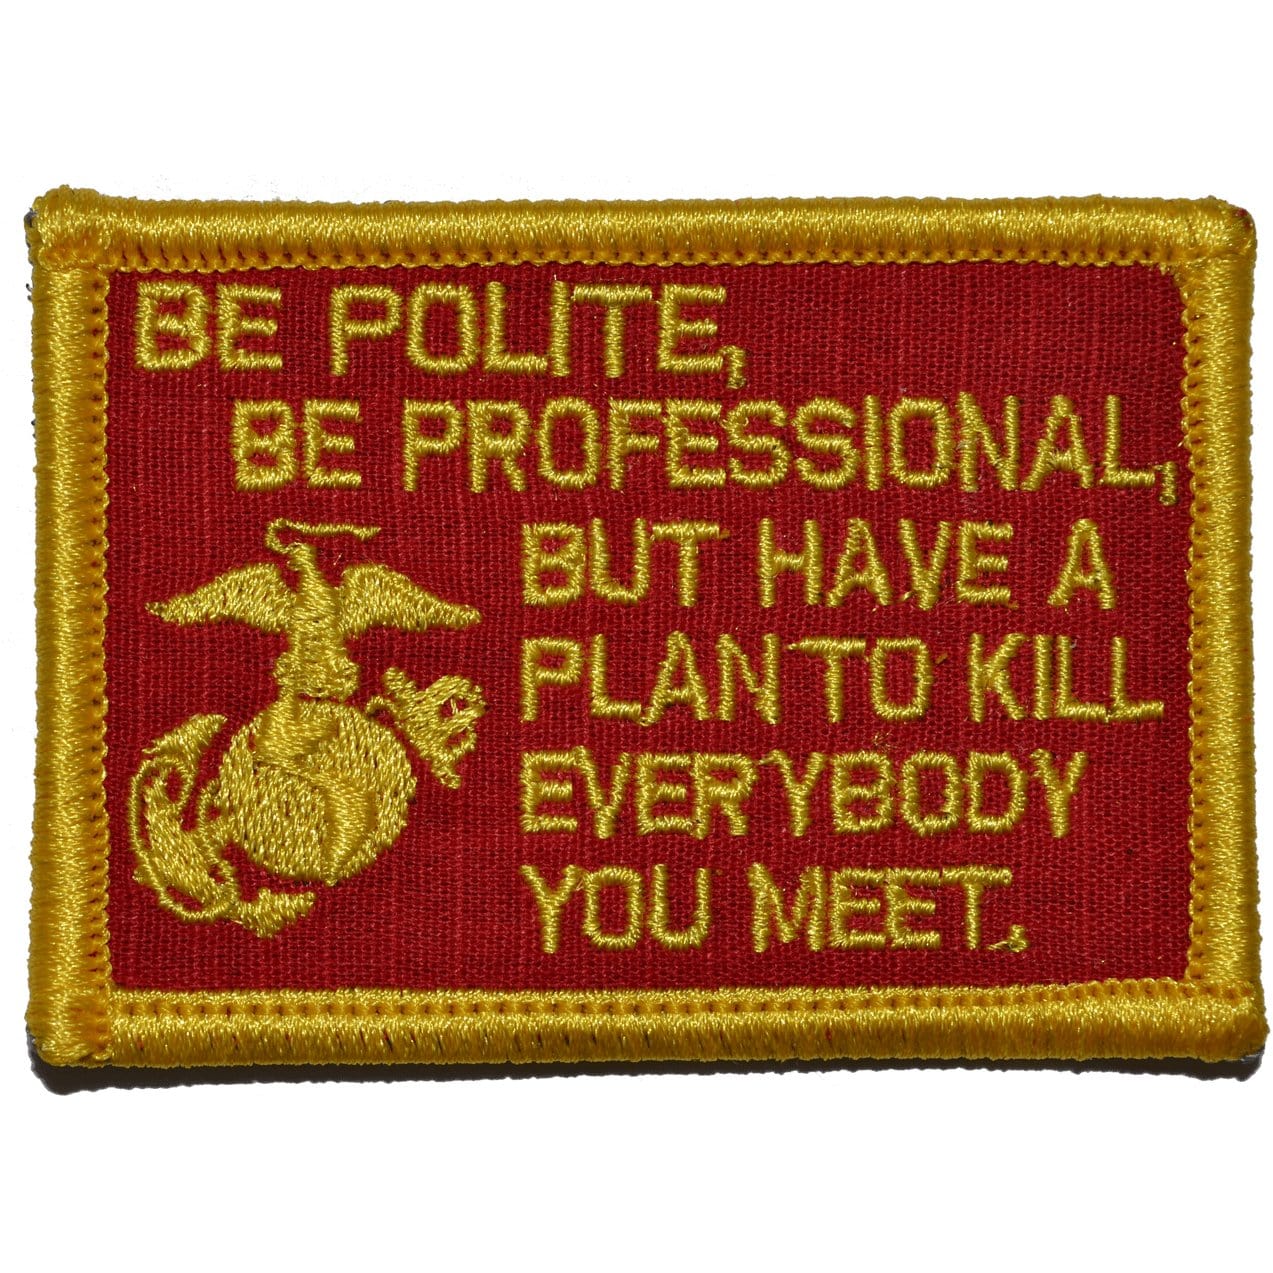 Tactical Gear Junkie Patches Full Color Be Polite, Be Professional USMC Mattis Quote - 2x3 Patch